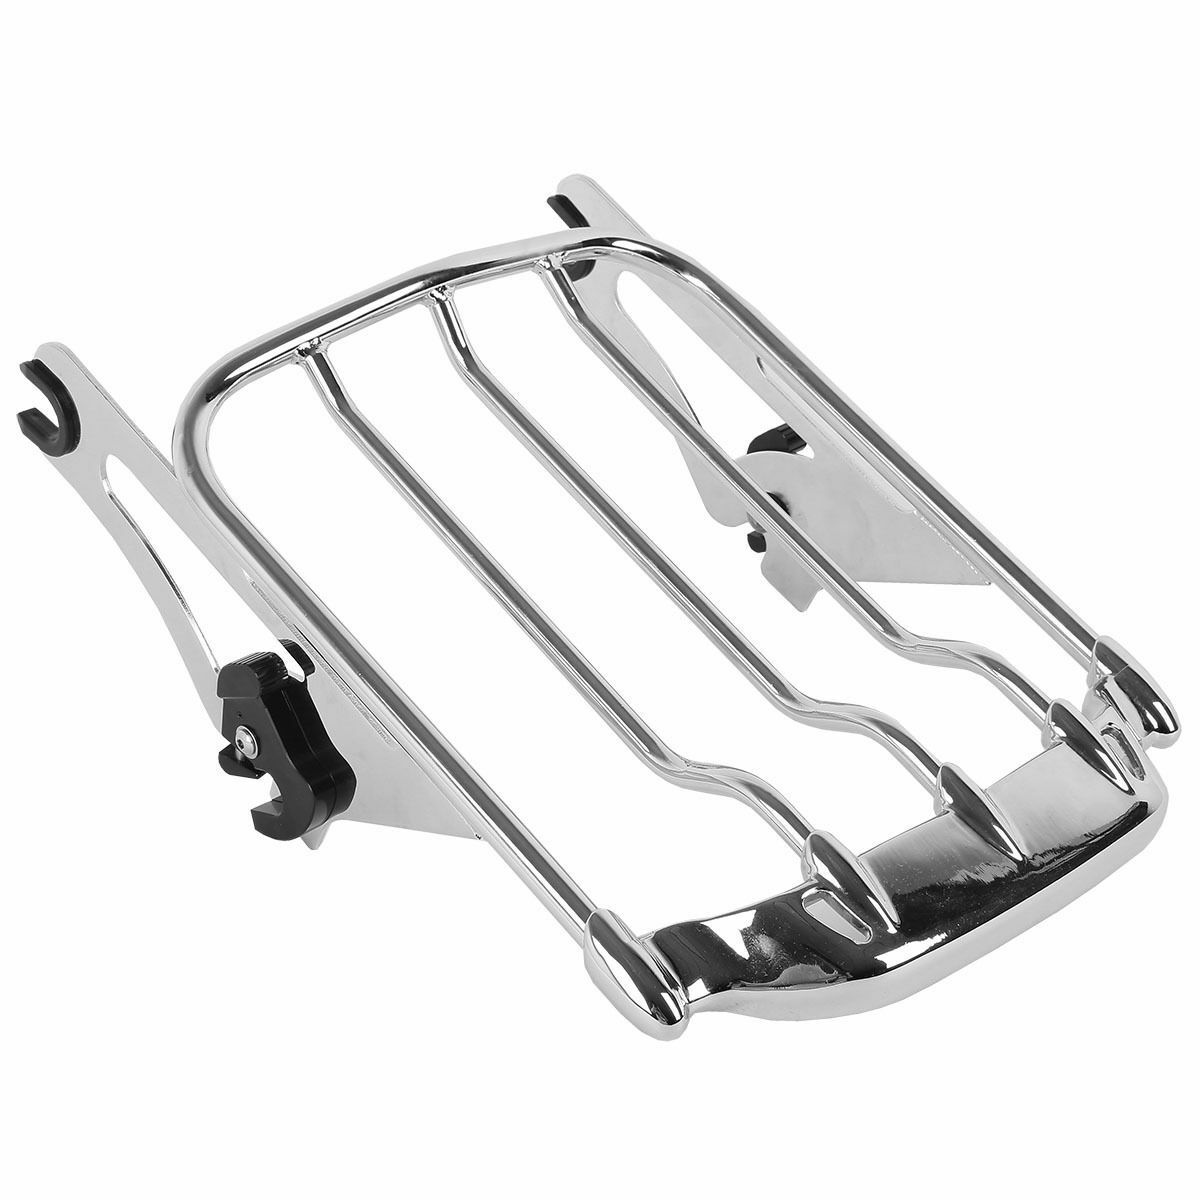 Two Up Air Wing Luggage Rack For Harley Electra Street Glide Road King 2009-2020